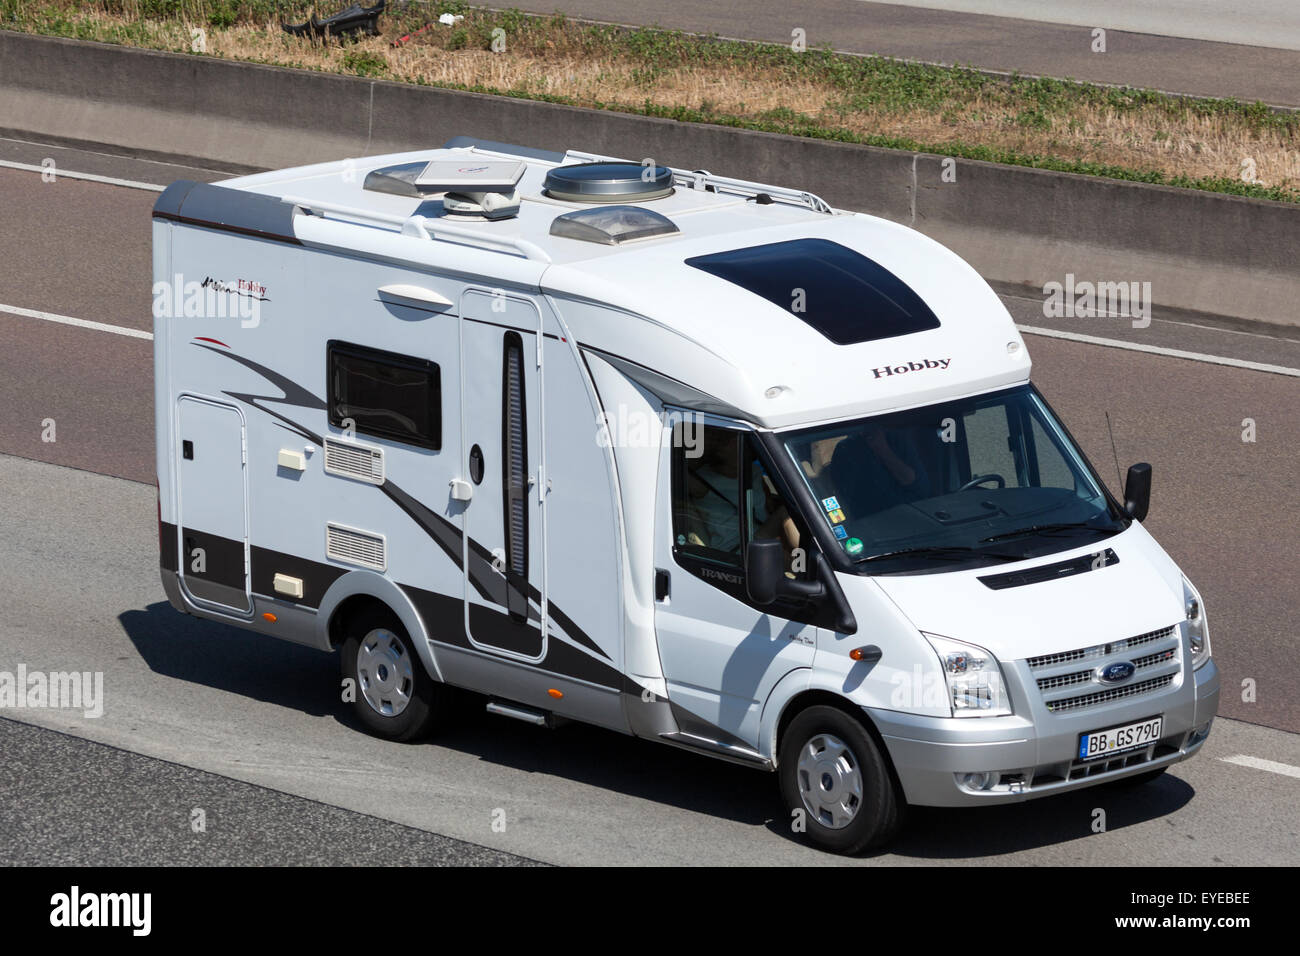 Ford Transit Hobby Mobile Home on the highway in Germany Stock Photo